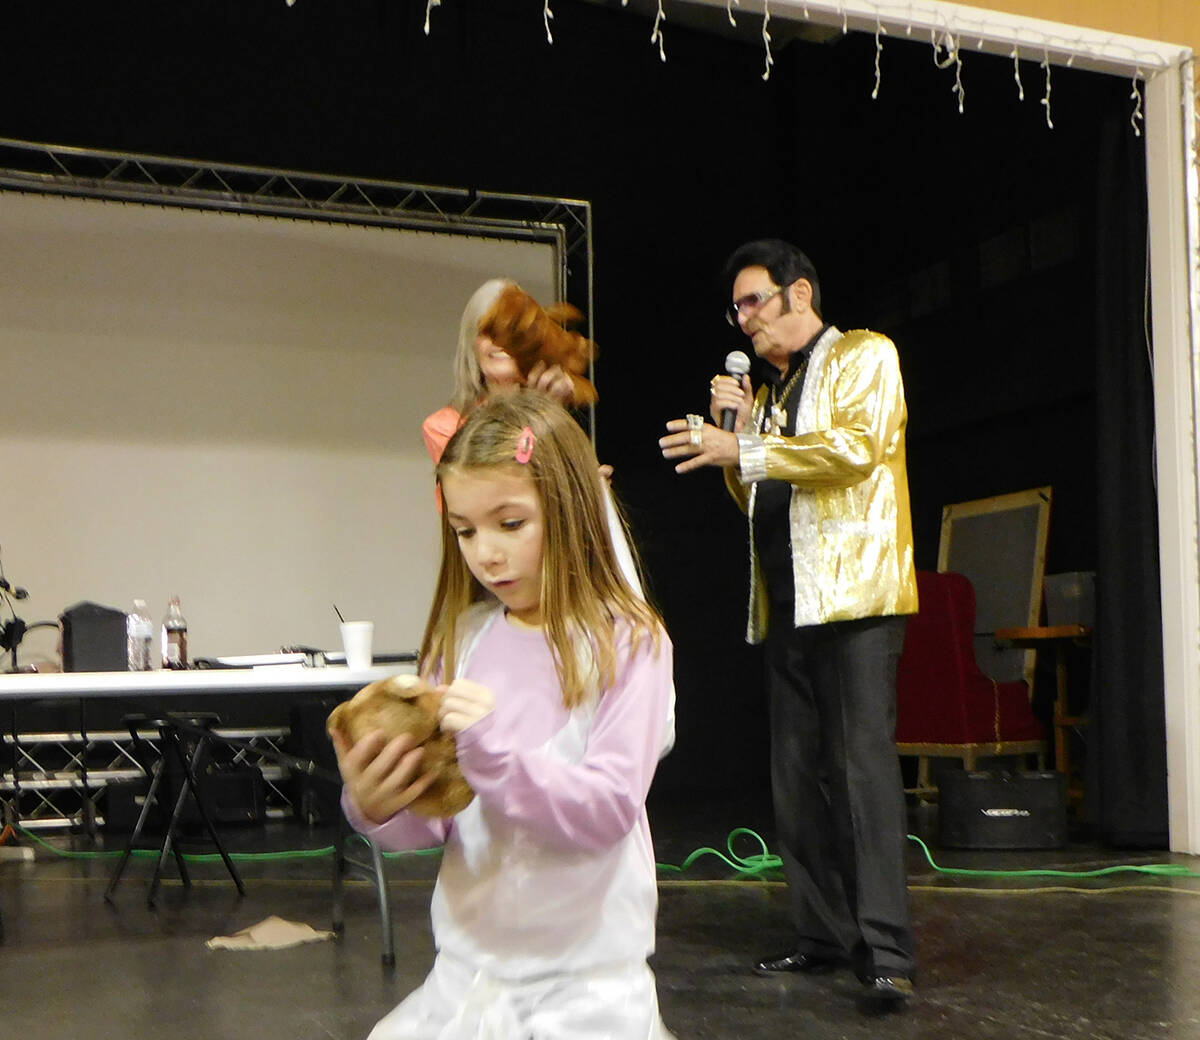 Robin Hebrock/Pahrump Valley Times A young girl admires the teddy bear she was given by Elvis i ...